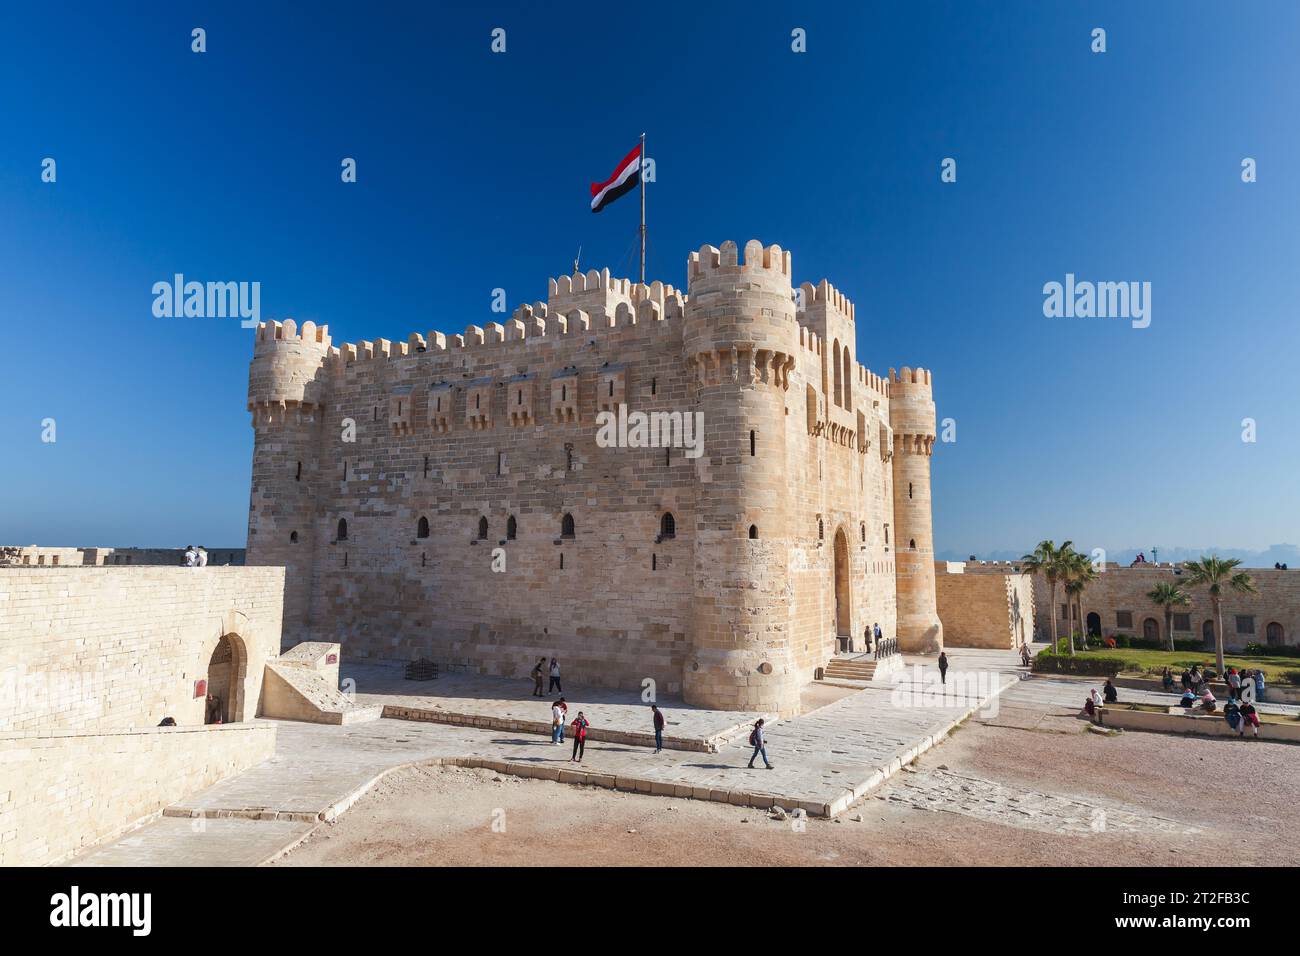 Alexandria, Egypt - December 14, 2018: People are near The Citadel of Qaitbay or the Fort of Qaitbay, this is a 15th-century defensive fortress locate Stock Photo